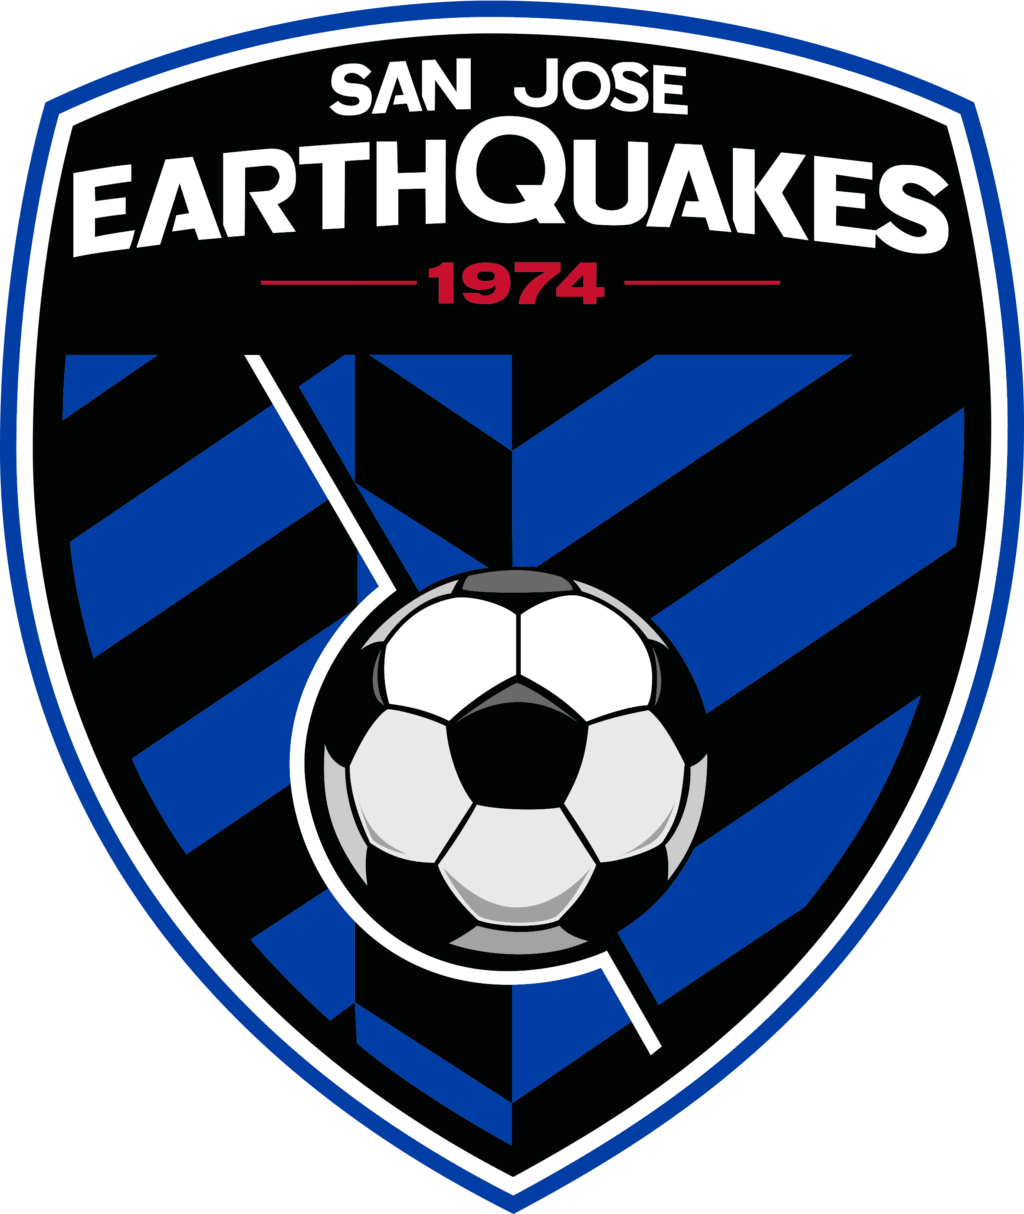 san jose earthquakes 07 MLS Logo San Jose Earthquakes, San Jose Earthquakes SVG, Vector San Jose Earthquakes, Clipart San Jose Earthquakes, Football Kit San Jose Earthquakes, SVG, DXF, PNG, Soccer Logo Vector San Jose Earthquakes EPS download MLS-files for silhouette, files for clipping.